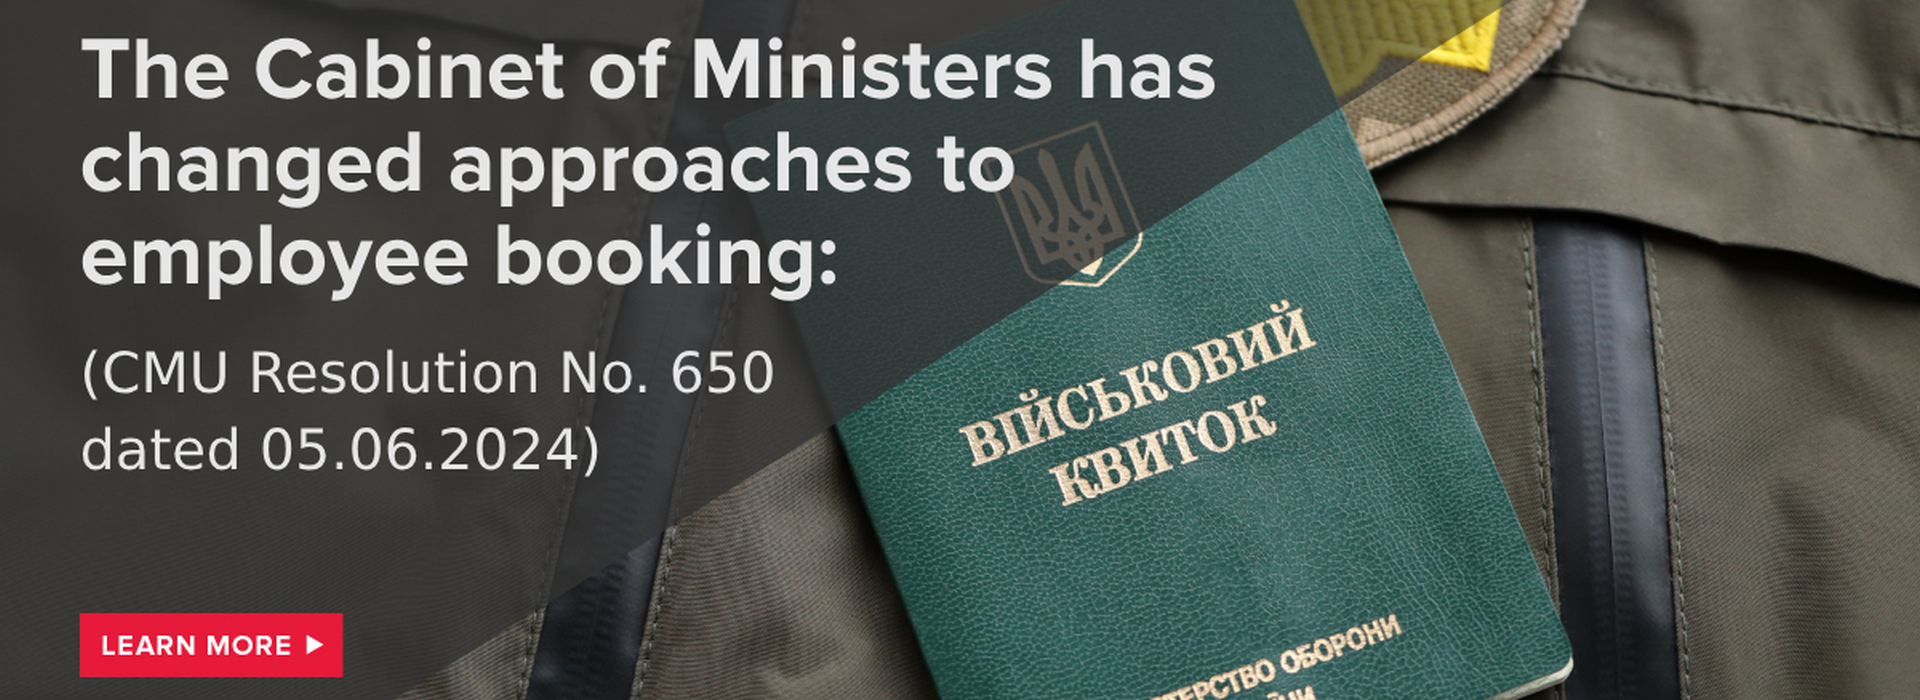 BDO in Ukraine: The Cabinet of Ministers Has Changed Approaches to Employee Booking (CMU Resolution #650 dated 05.06.2024)